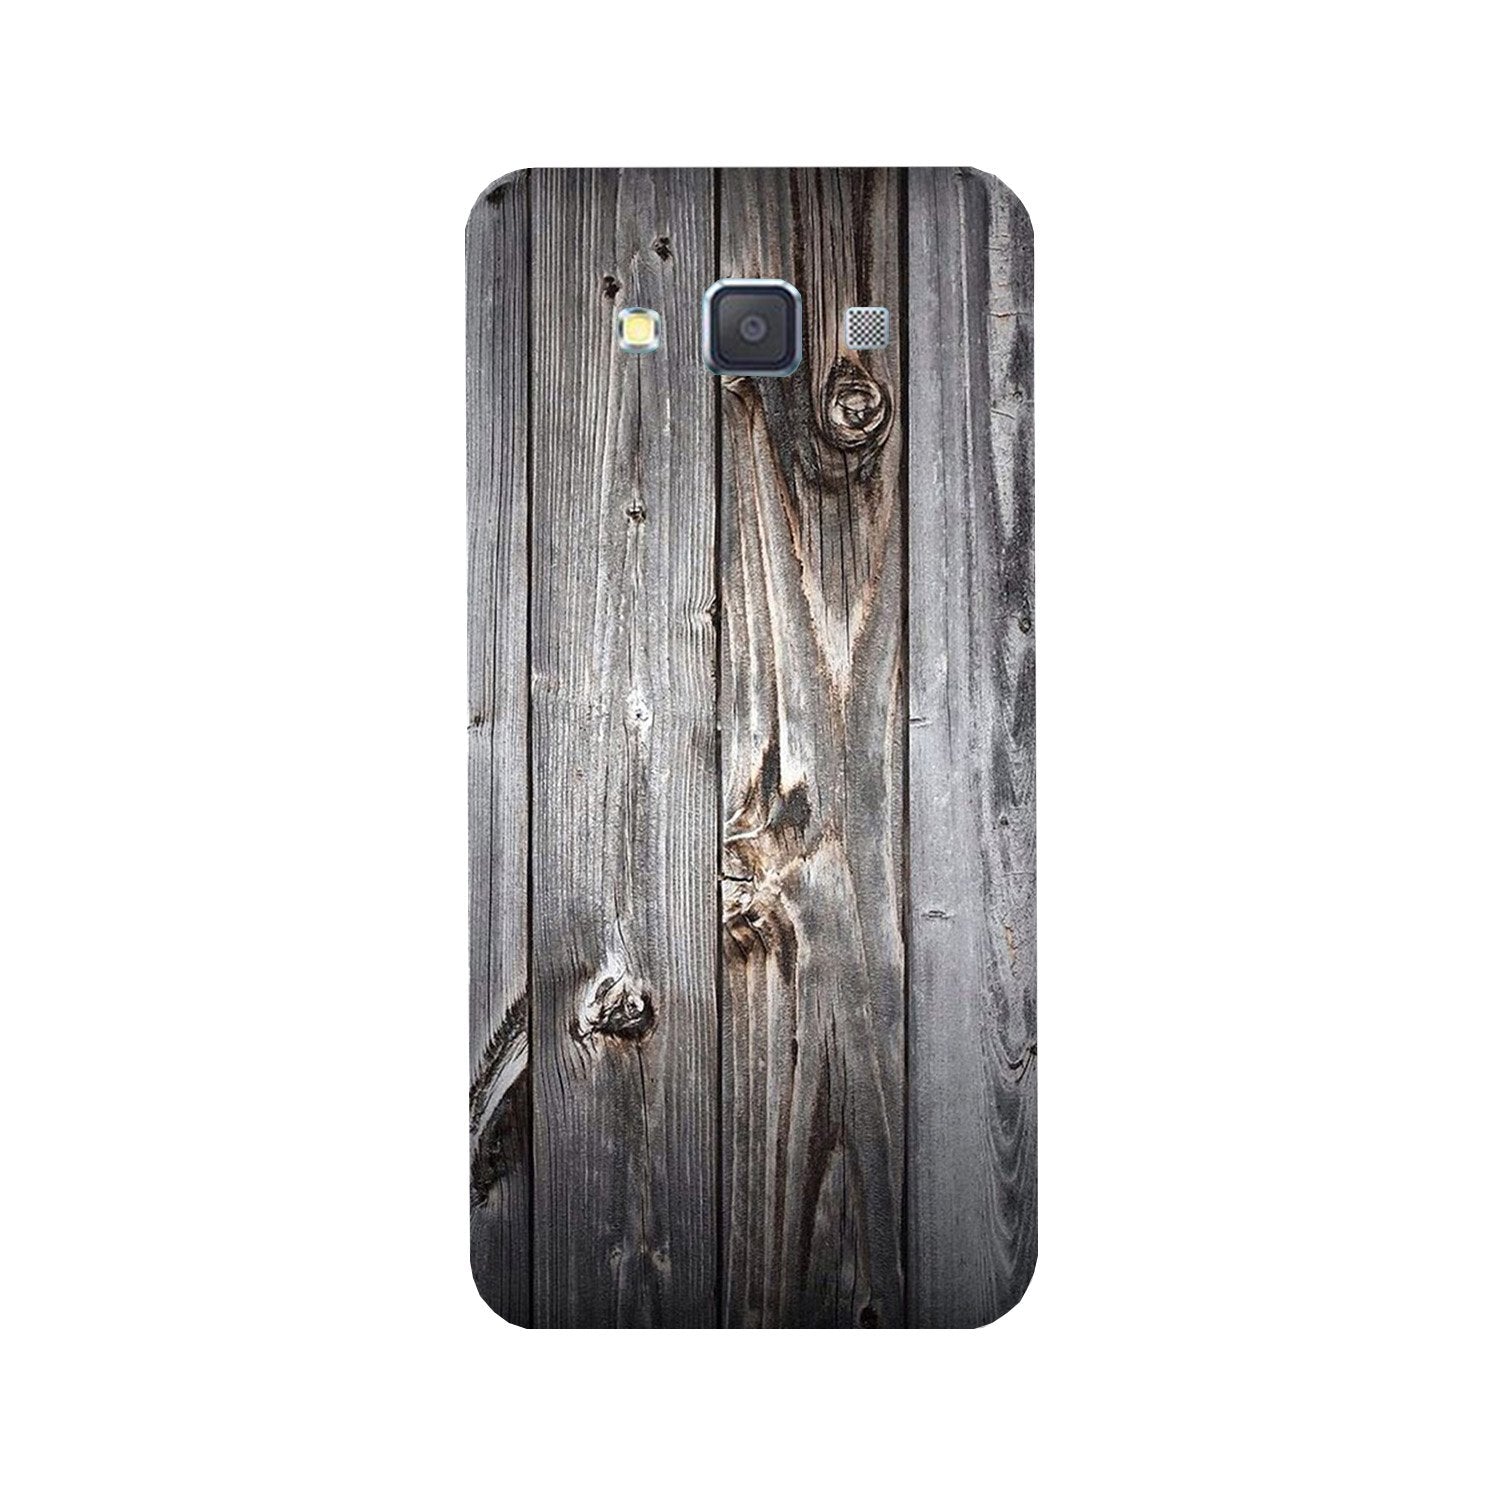 Wooden Look Case for Galaxy Grand Max  (Design - 114)